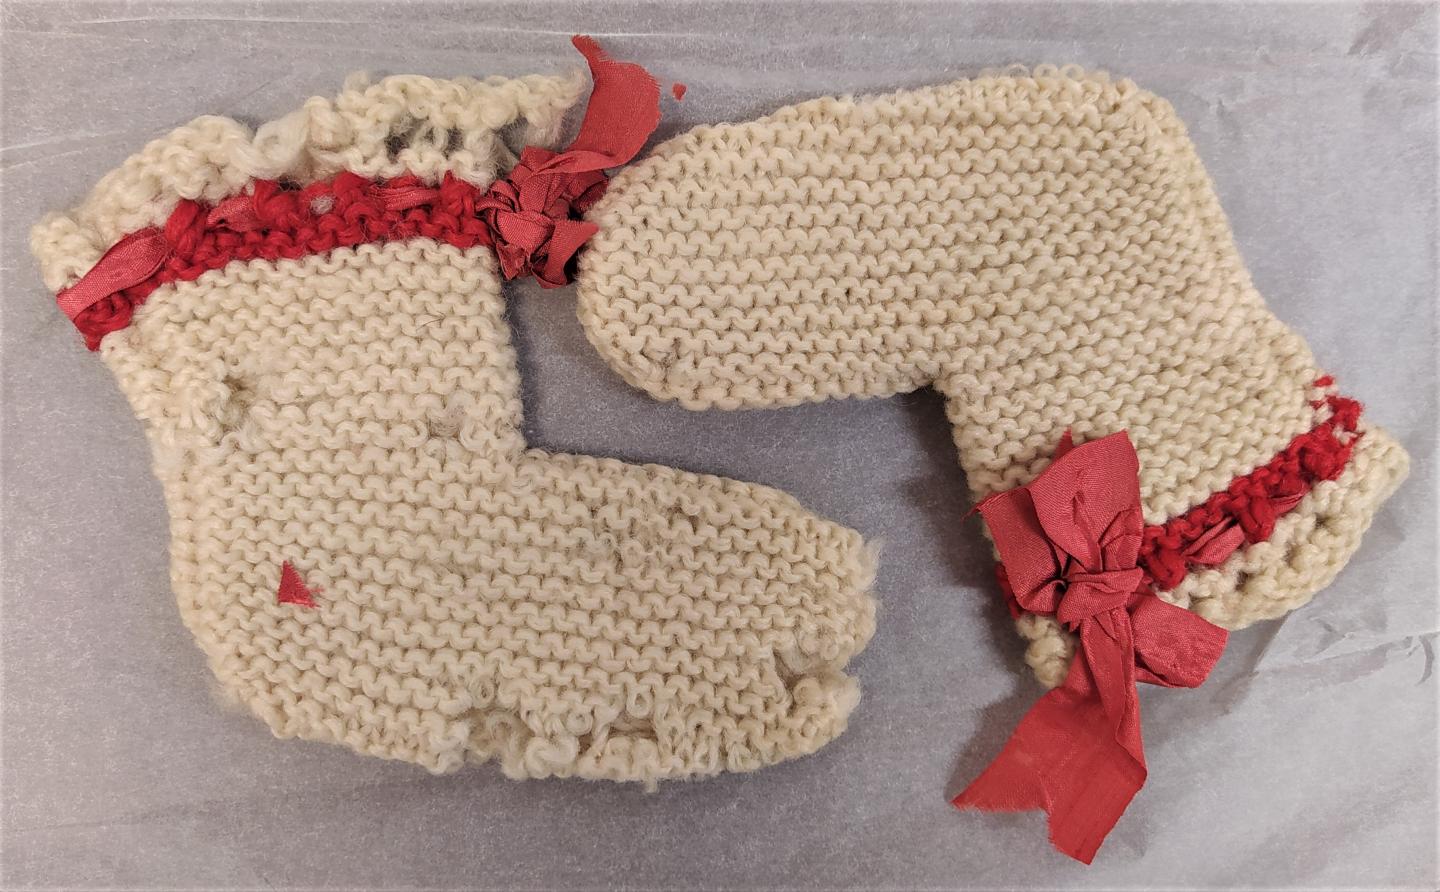 Pair of booties knitted by Hannah More for John MacGregor (RMG reference: MCG.2/1)